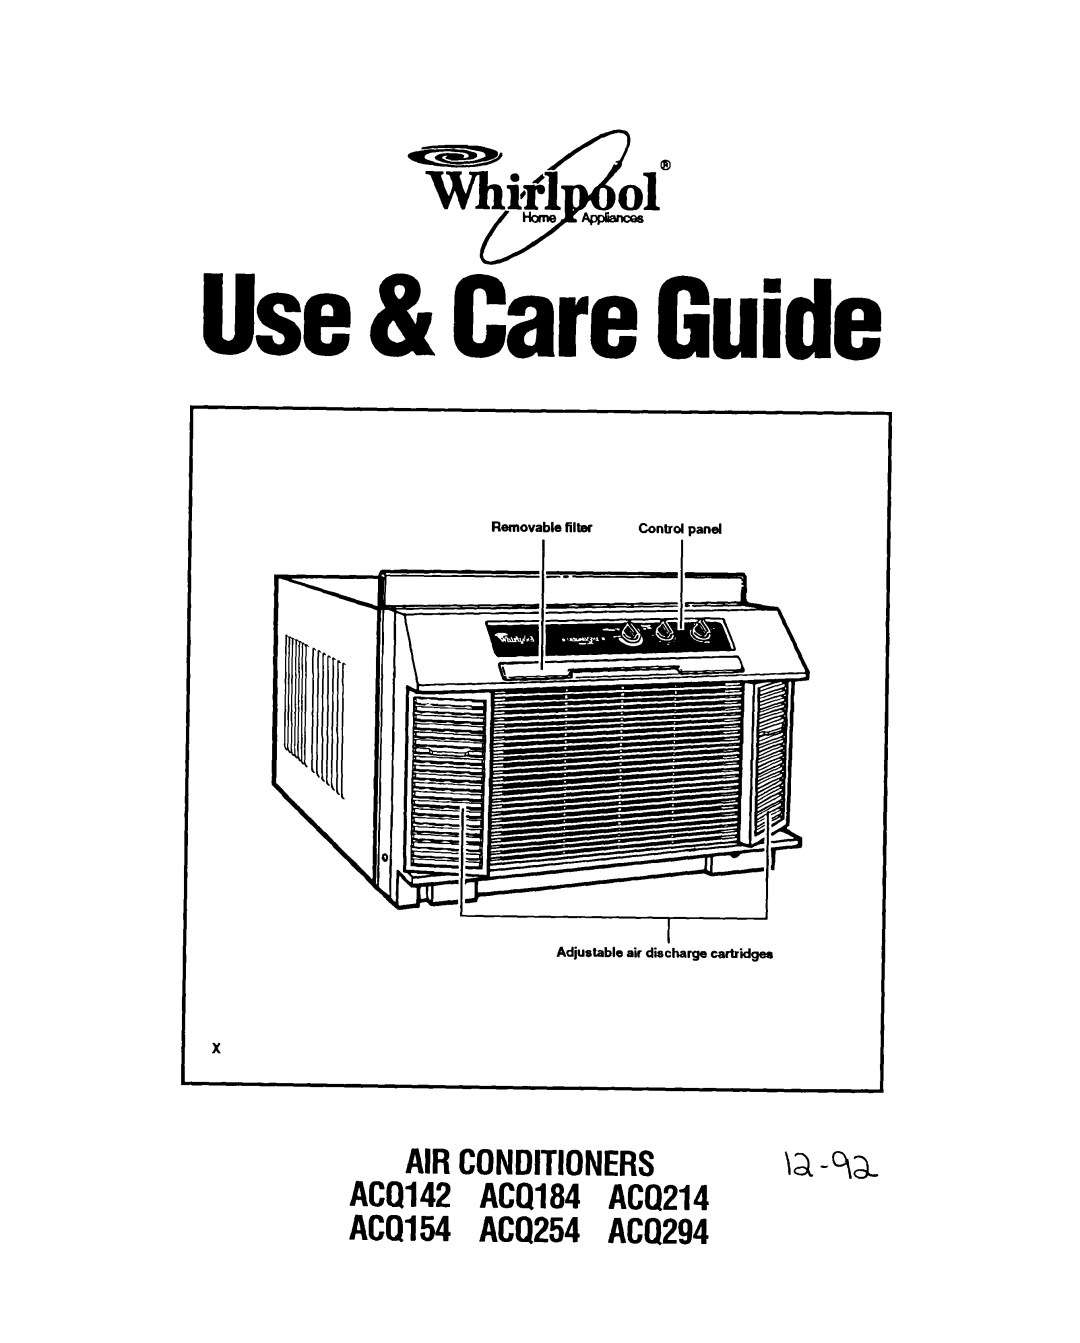 Whirlpool manual Use& dre Guide, T&f1 01 4a, AIRCONDITIONERS \a-9a.ACQ142 ACQ184 ACQ214, ACQ154 ACQ254 ACQ294 